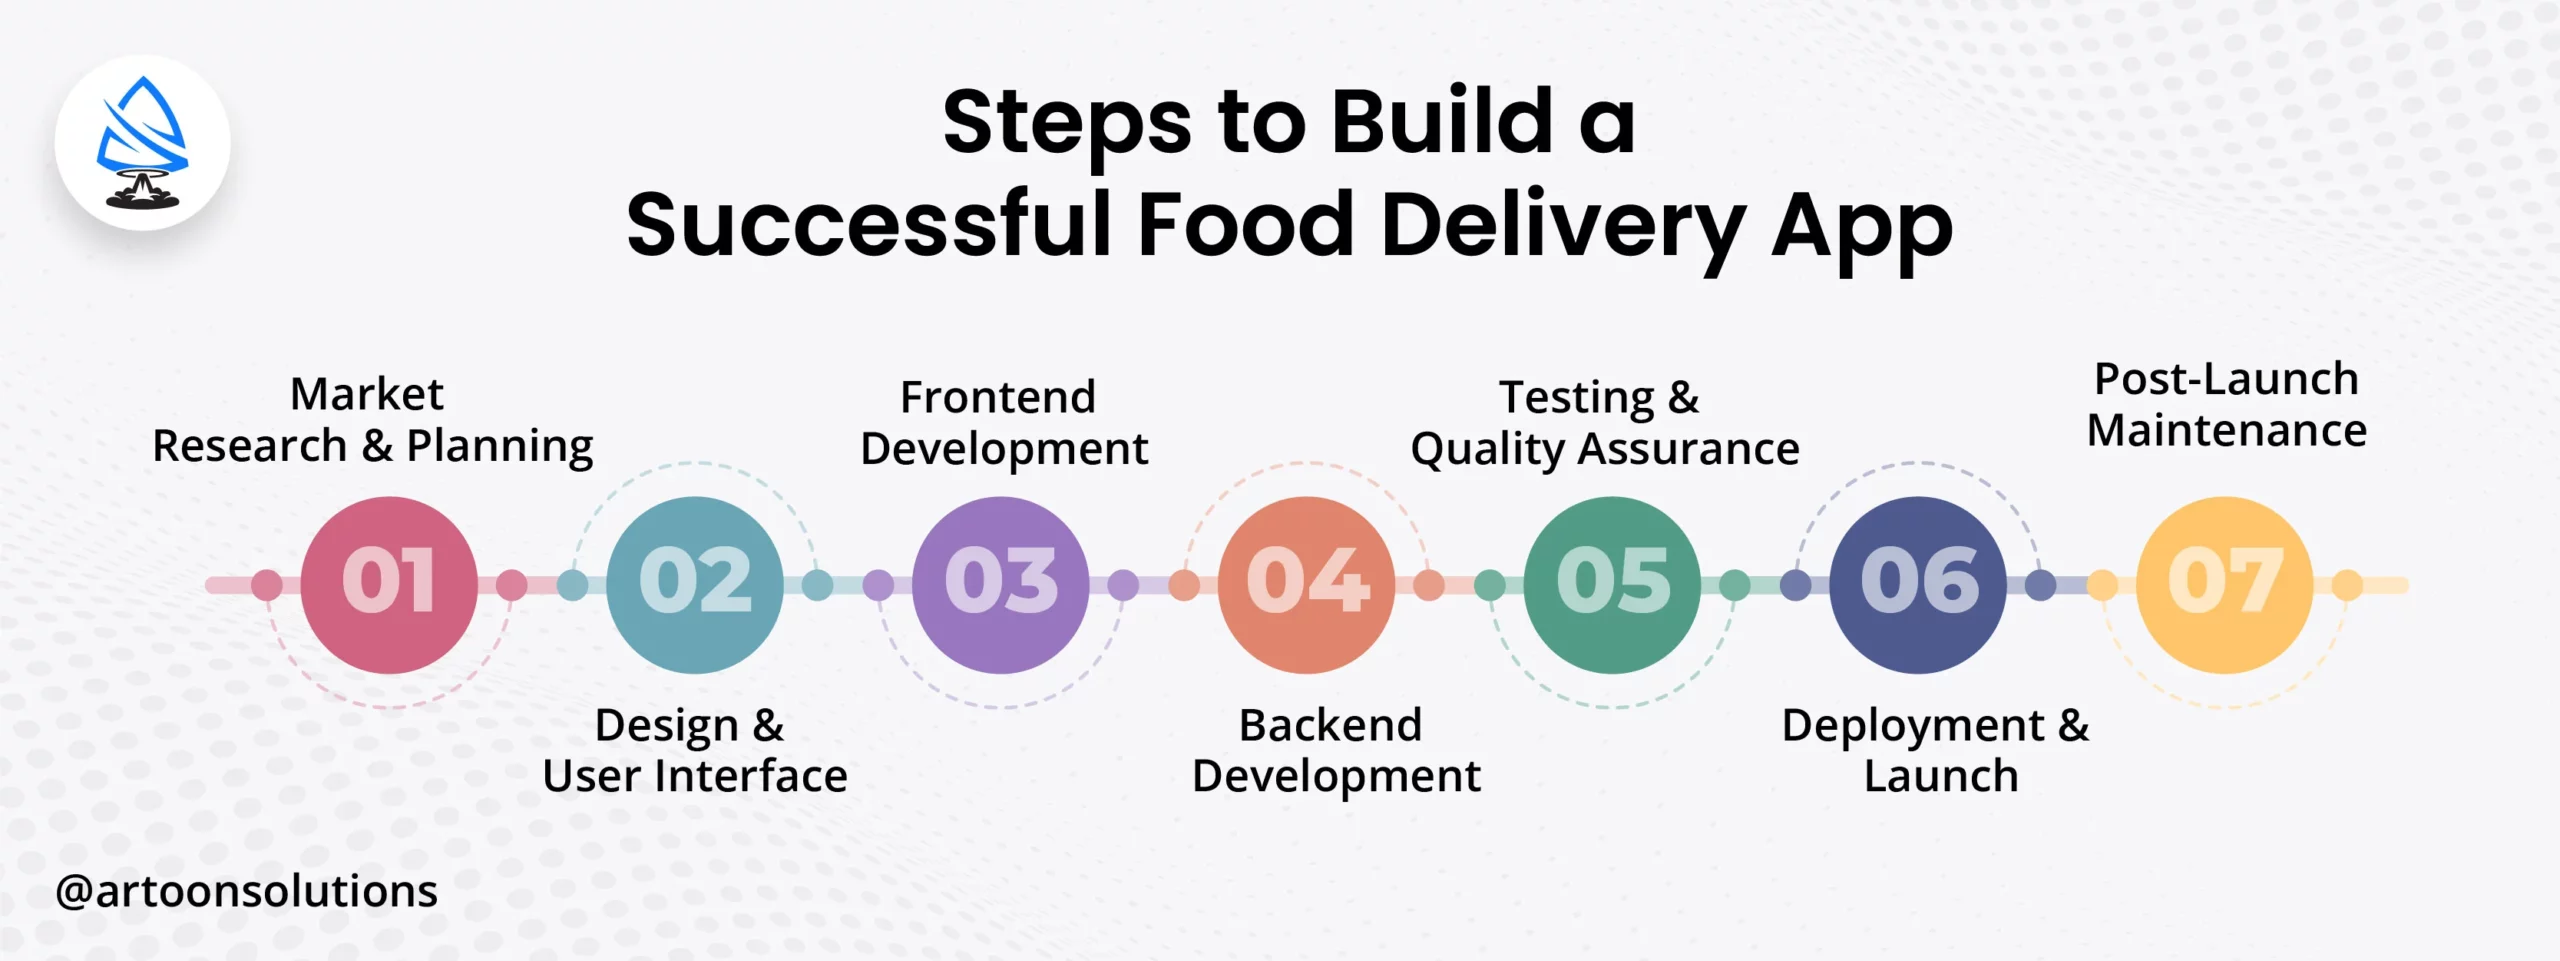 Build a Successful Food Delivery App